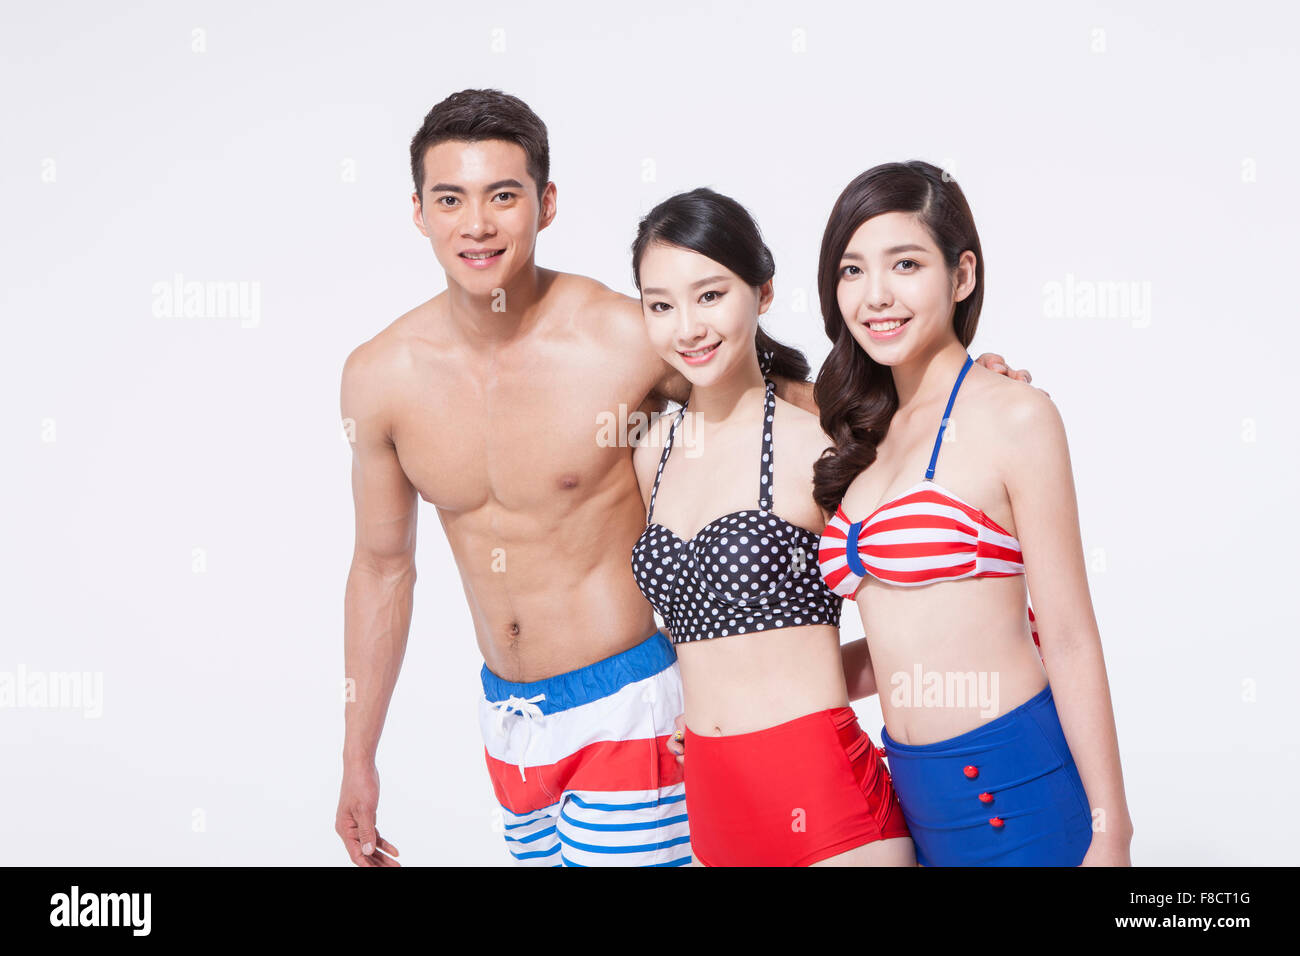 Three Teenage Girls (16-17) Wearing Bikinis Pictured Against Sky Portrait  Stock Photo, Picture and Royalty Free Image. Image 19522563.